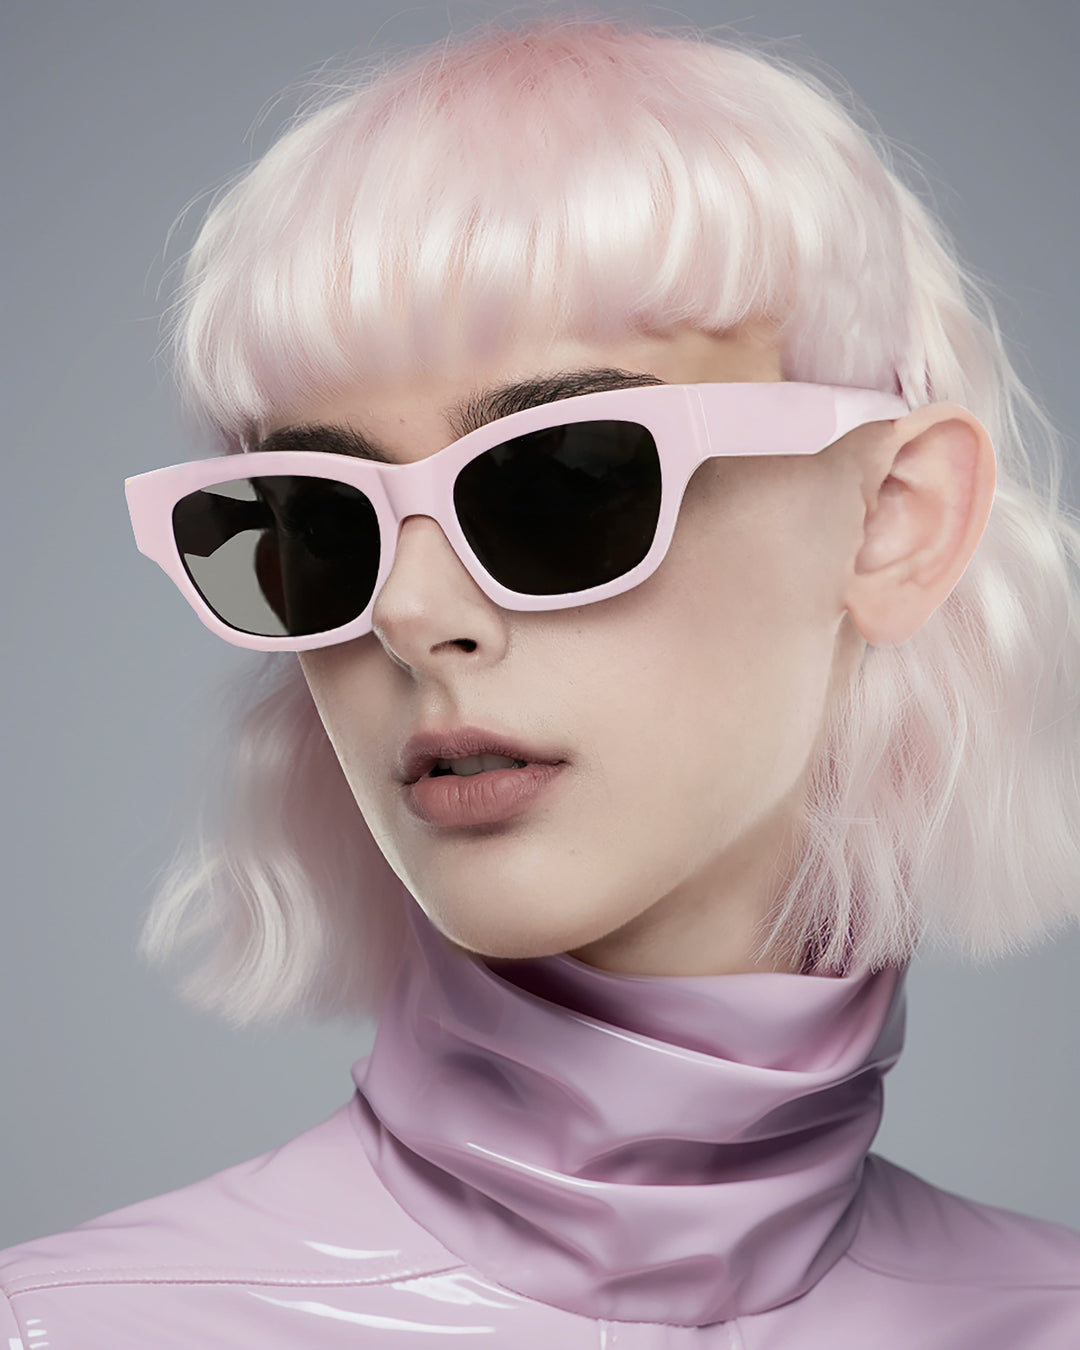 A stylish lady wearing mercury retrograde sunglasses flaunting vibrant pink locks and trendy shades exudes an air of sophistication and individuality.